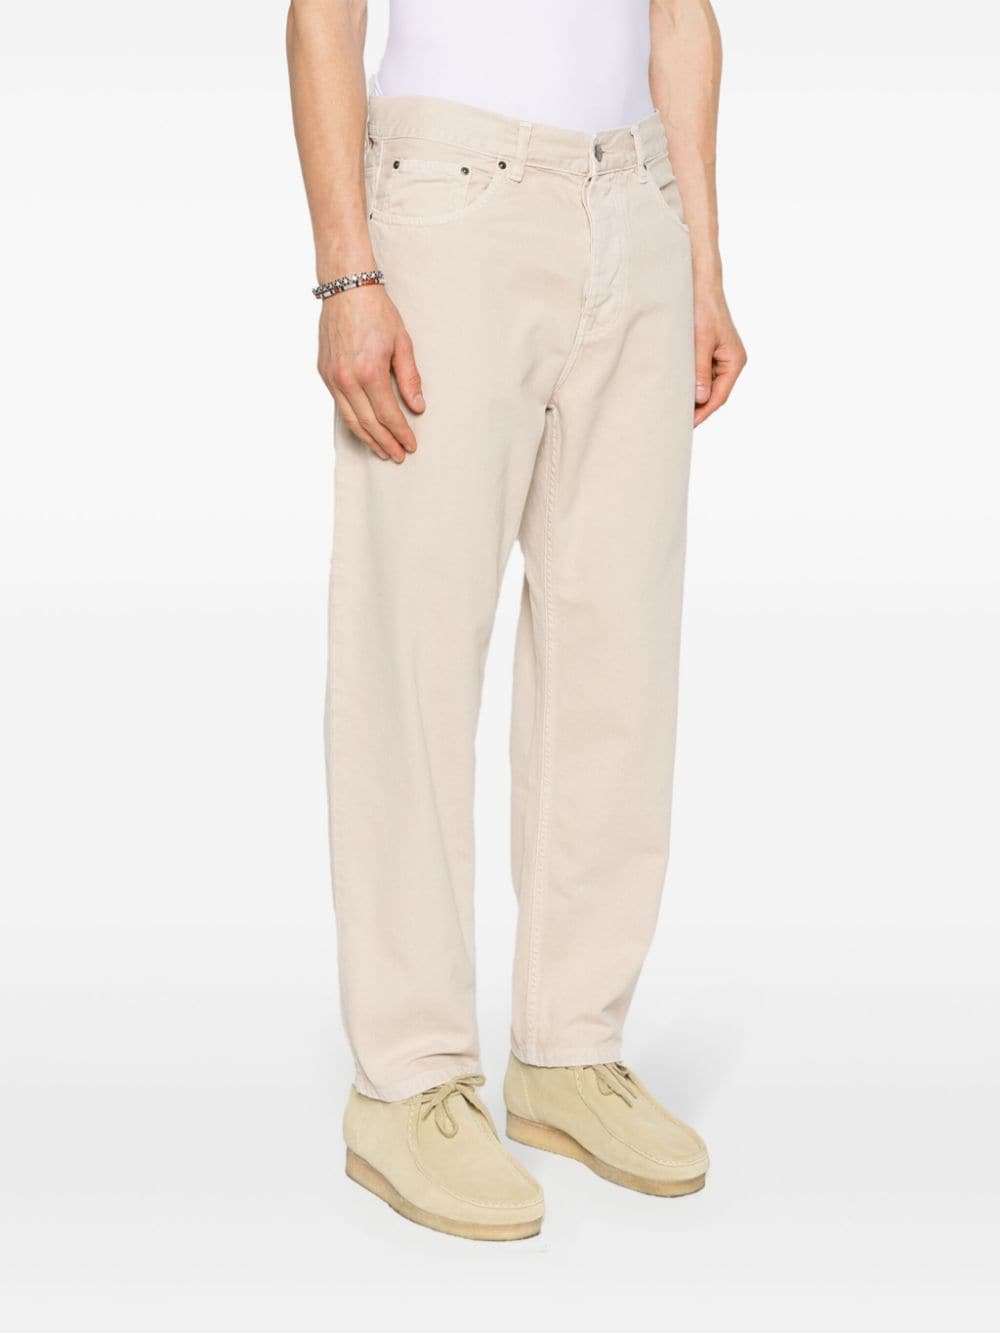 Carhartt WIP Newel mid-rise tapered jeans - Beige